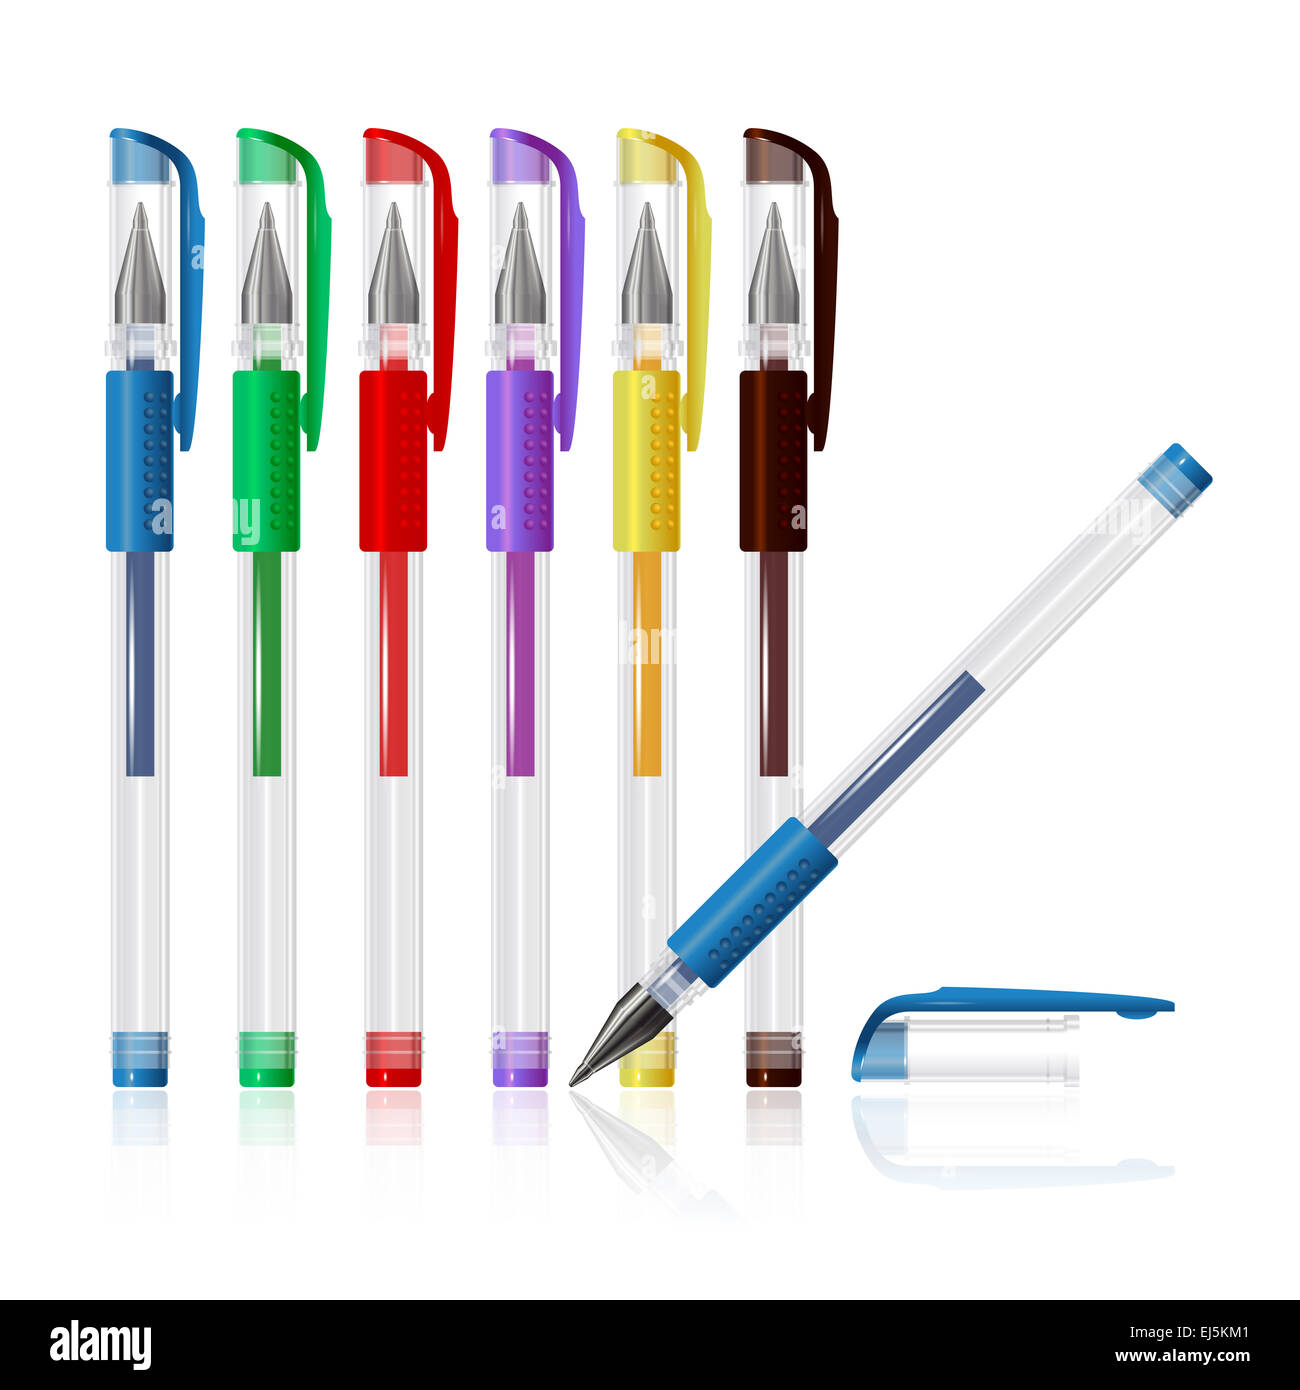 Vector image of collection of Roller ball pens Stock Photo